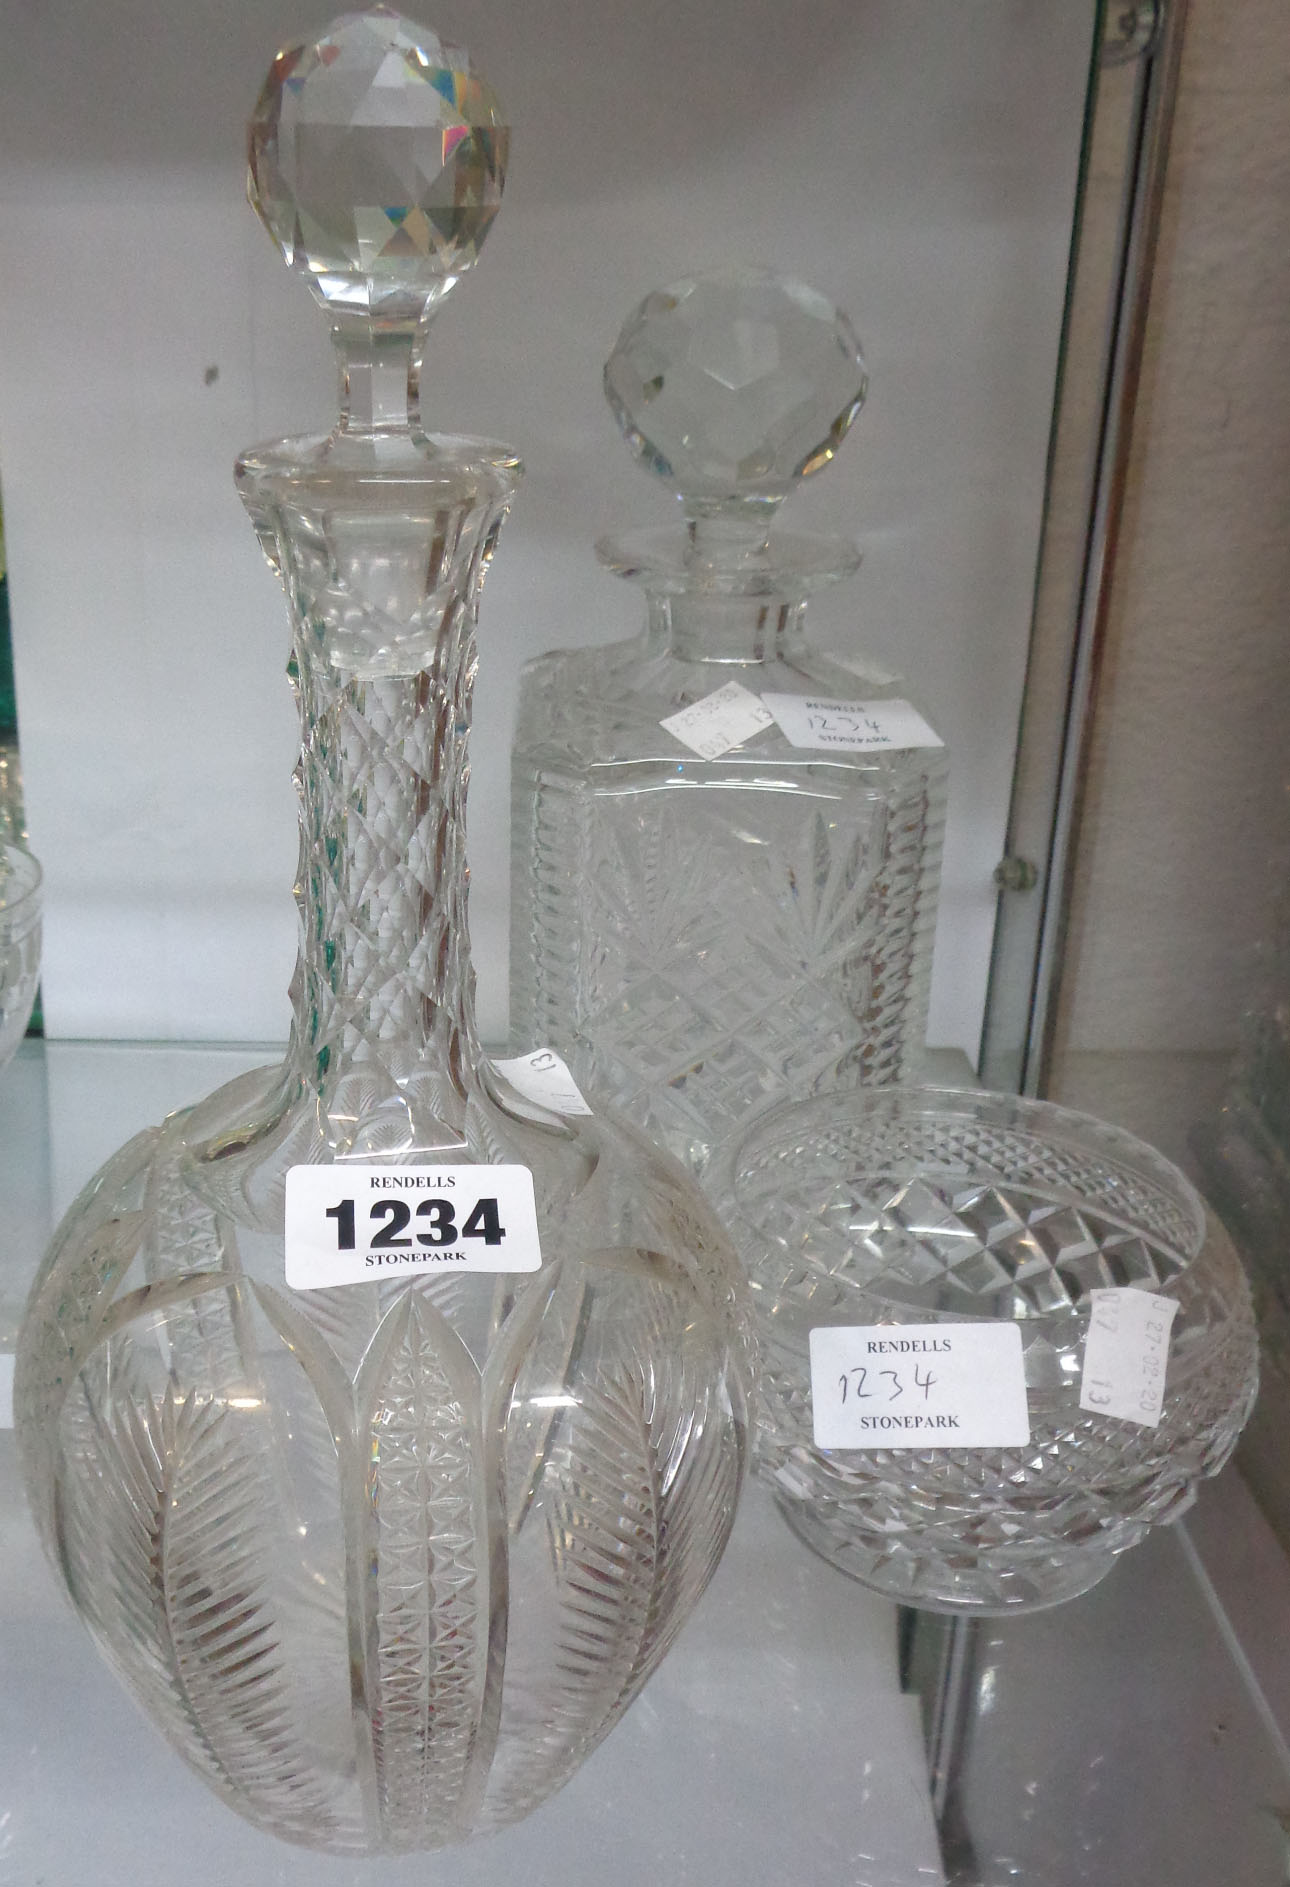 Two decanters and a glass bowl